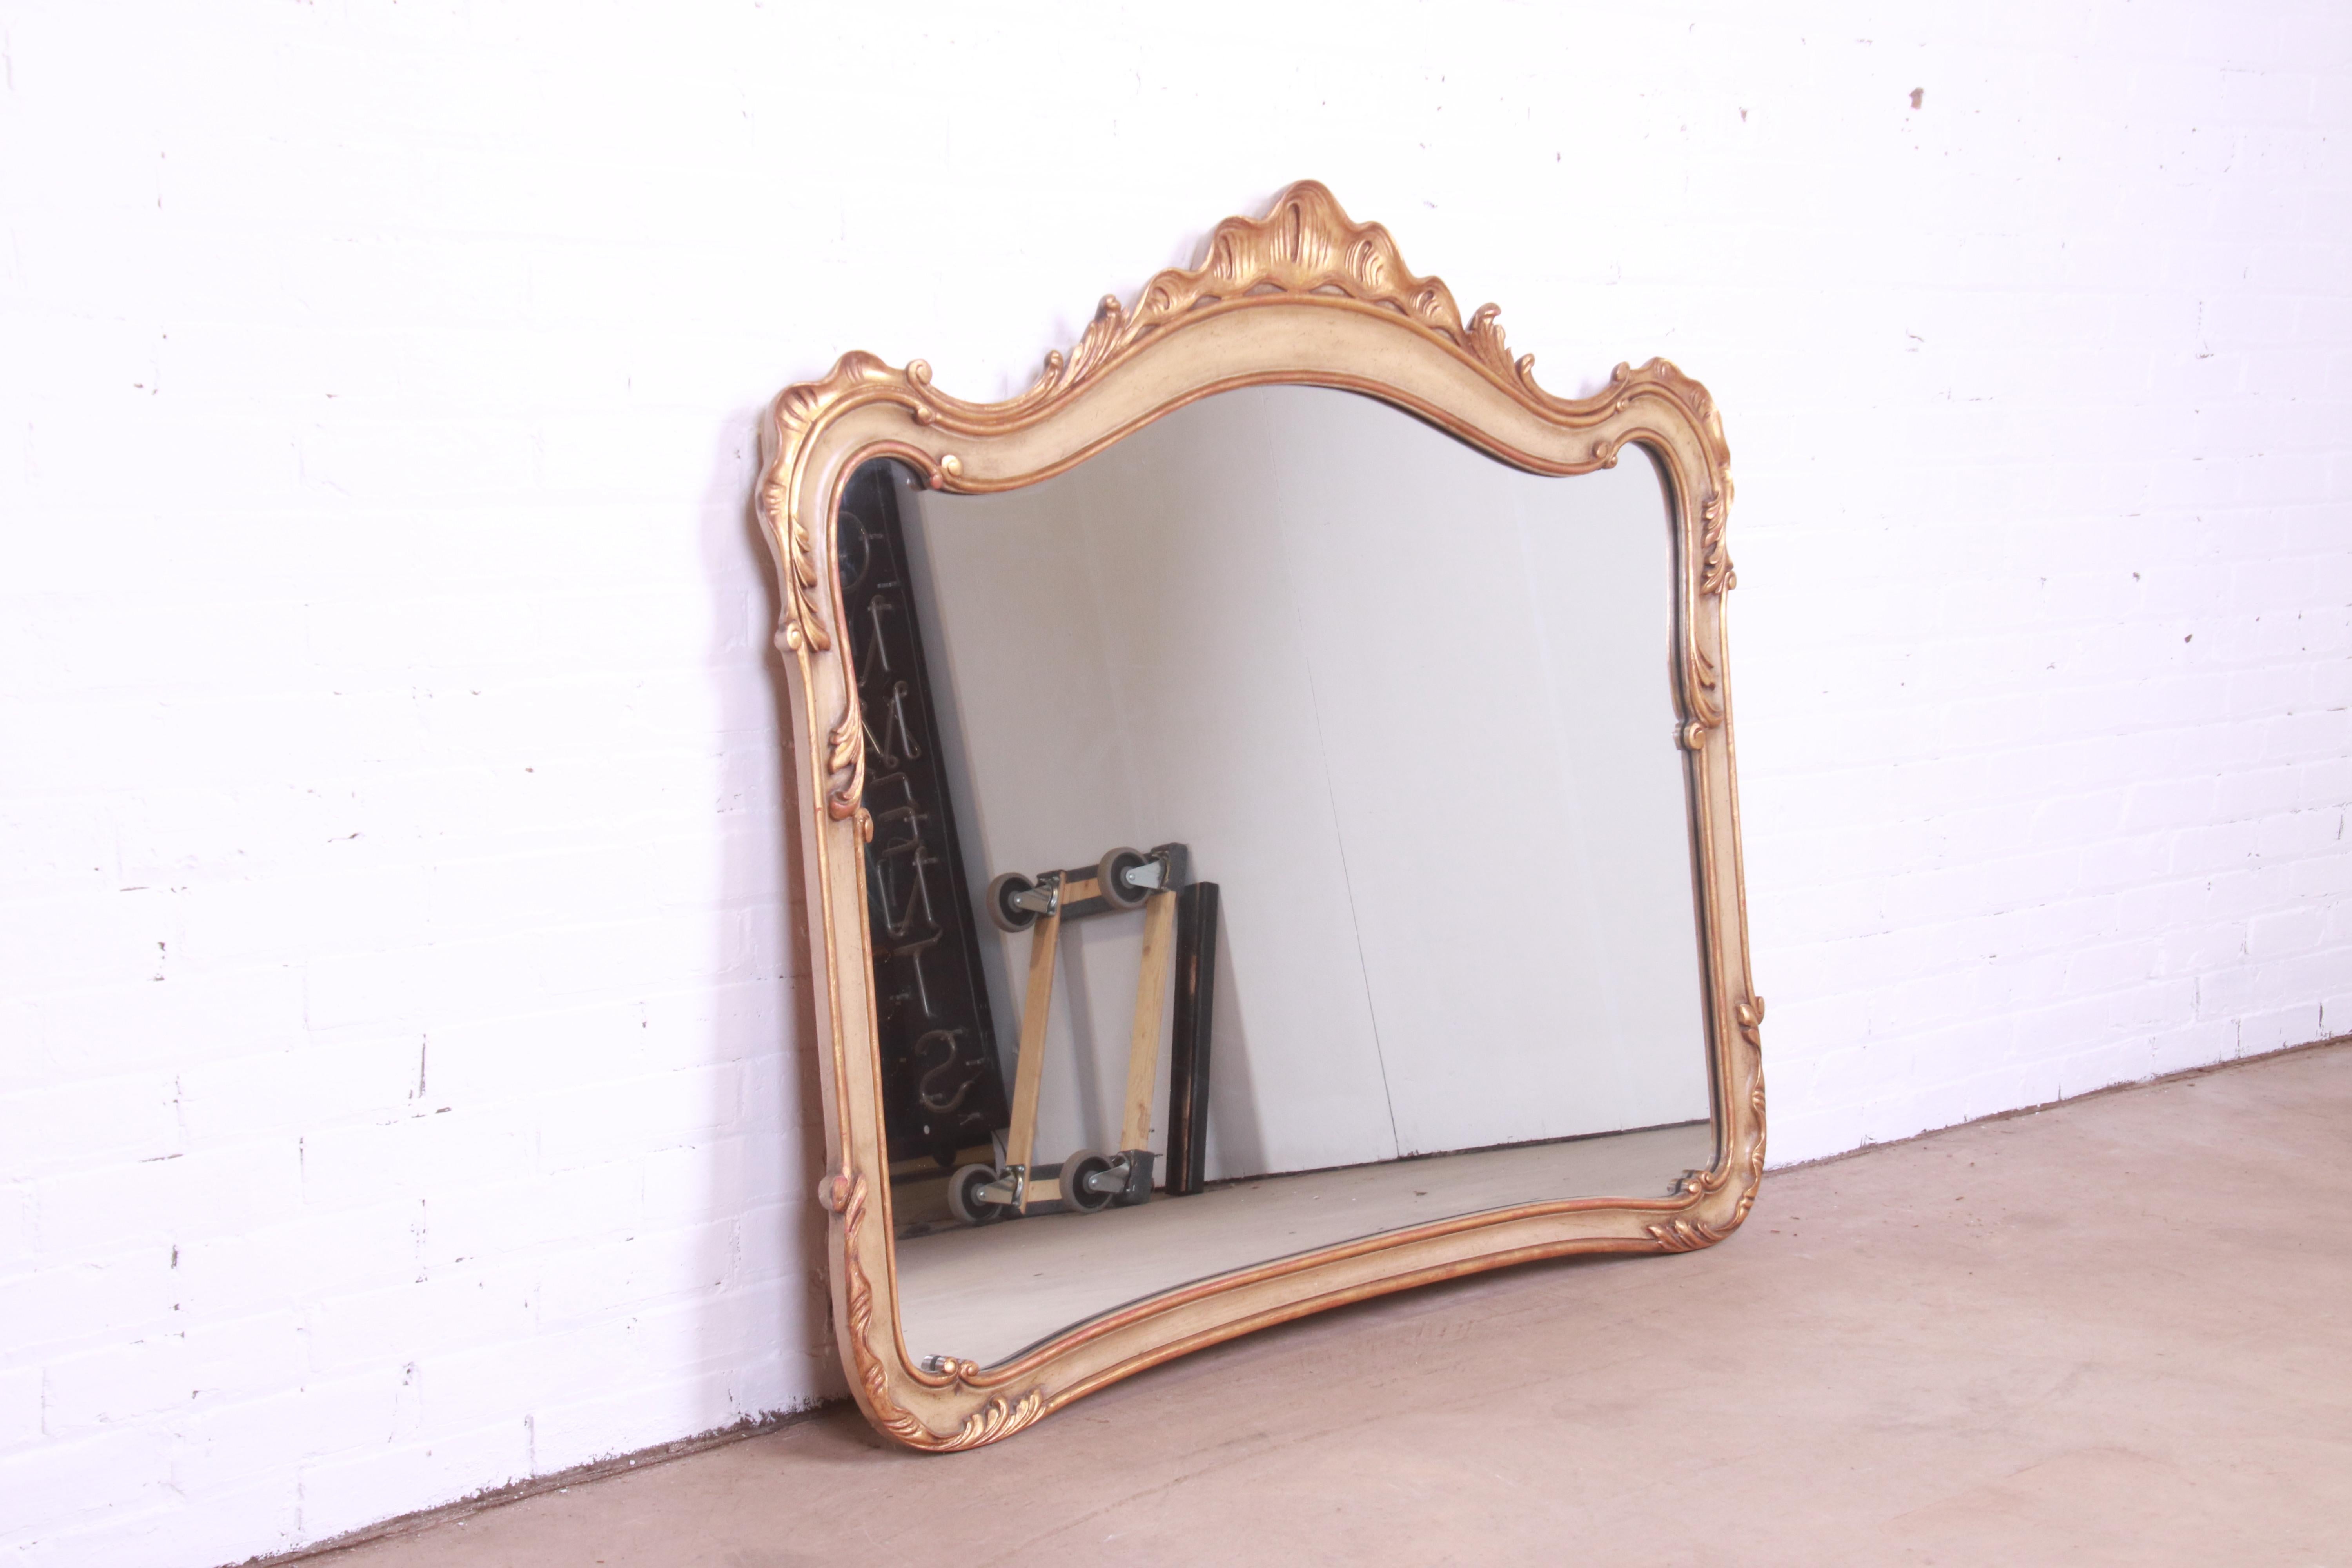 John Widdicomb French Rococo Gold Gilt and Painted Large Wall Mirror, 1940s In Good Condition For Sale In South Bend, IN